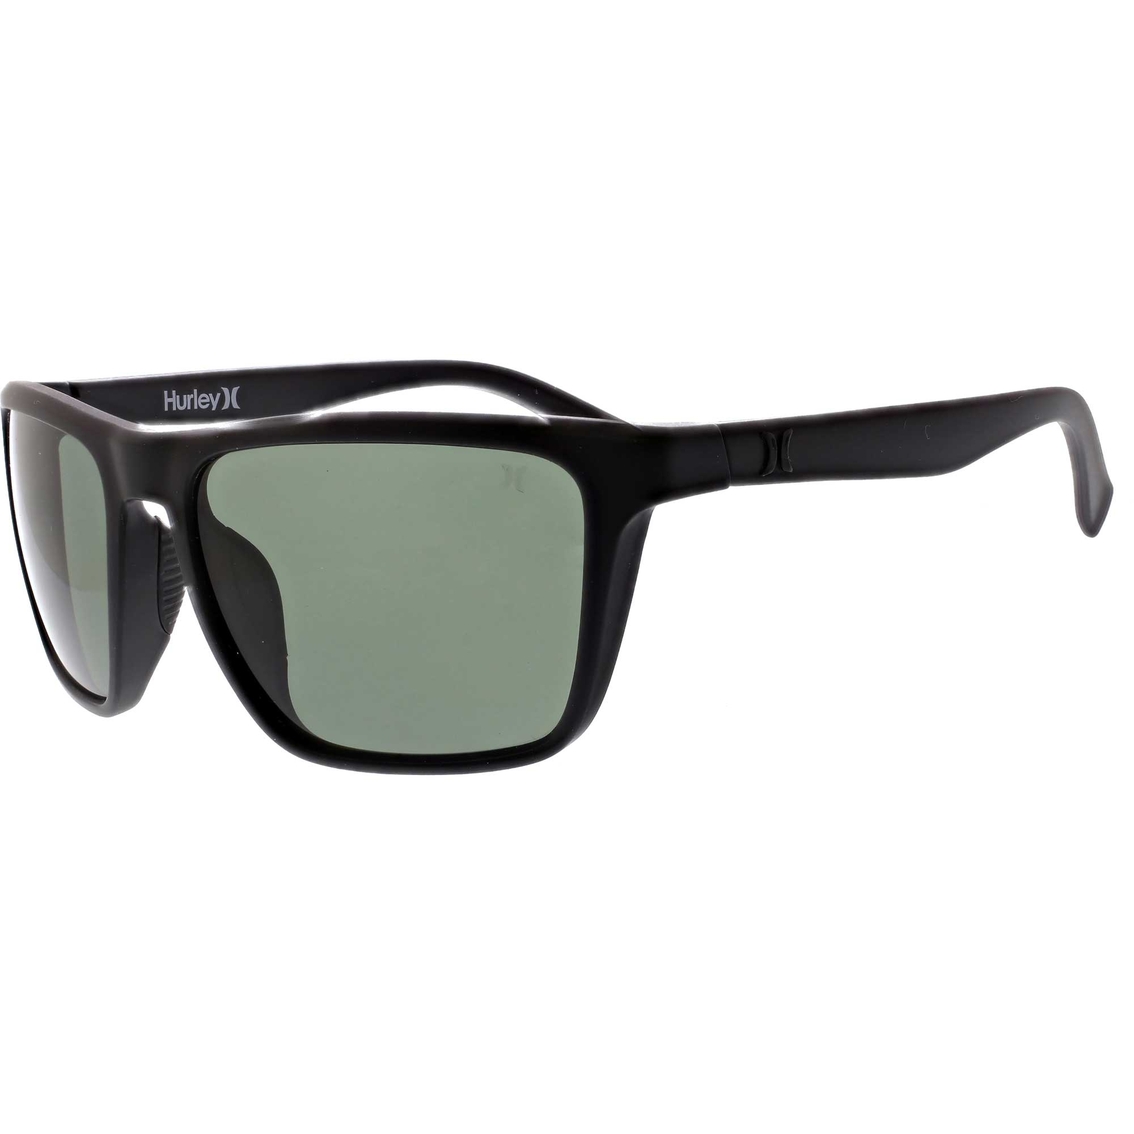 Hurley Cobblestones Wrapped Square | Sunglasses | Clothing ...